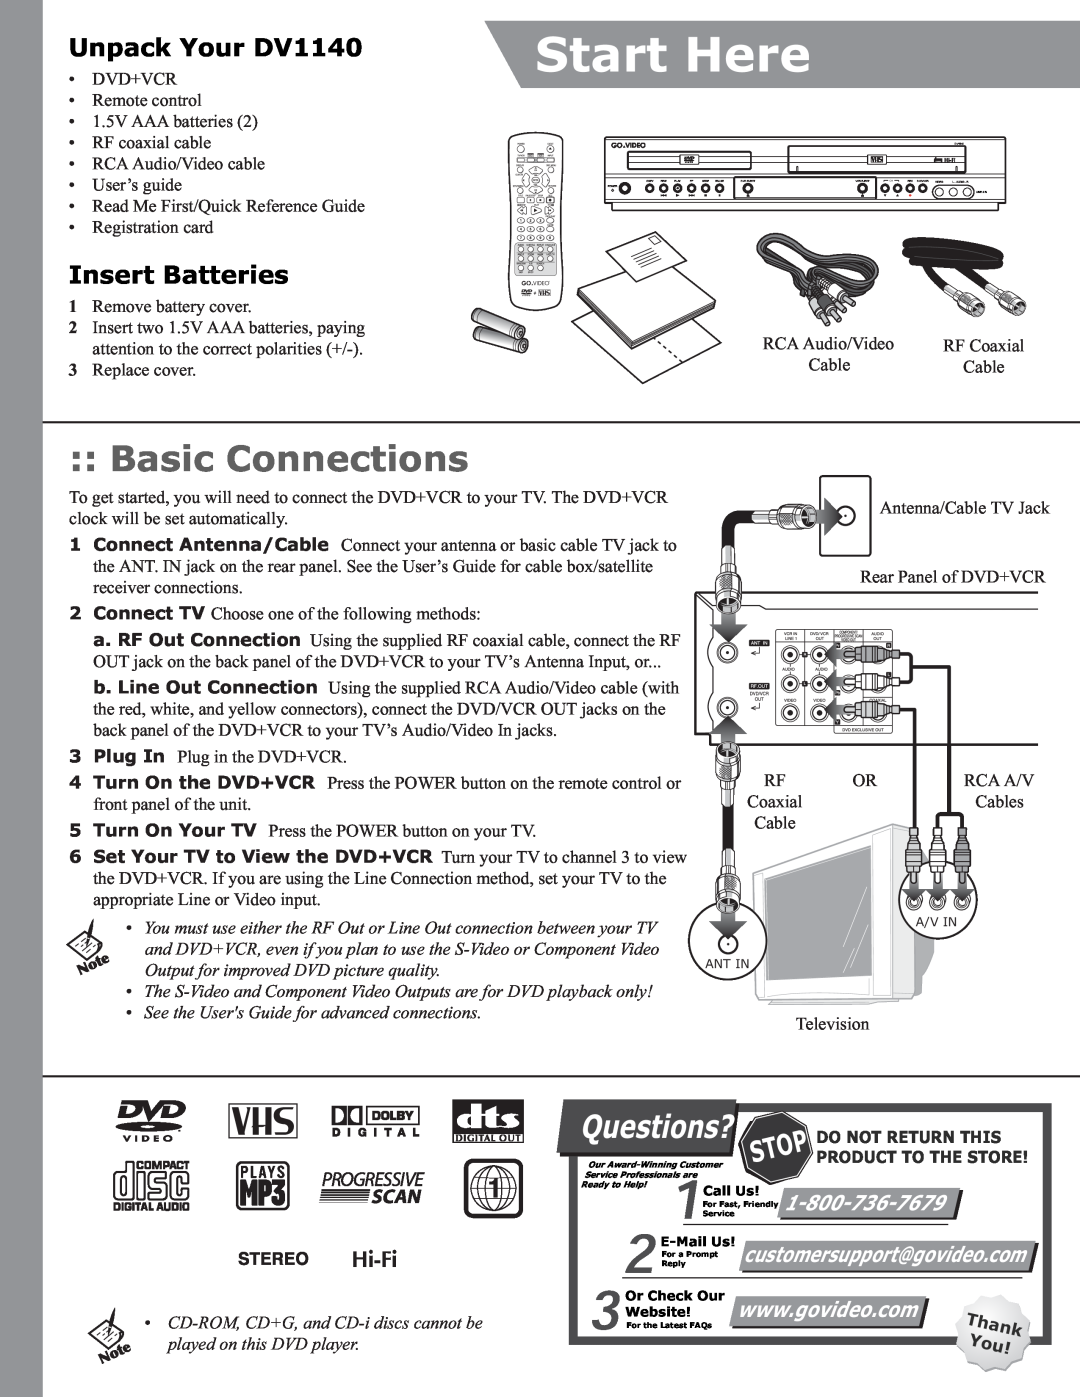 GoVideo DVD+VCR DV1140 manual Basic Connections, Unpack Your DV1140, Insert Batteries, Start Here, Questions?, Thank 